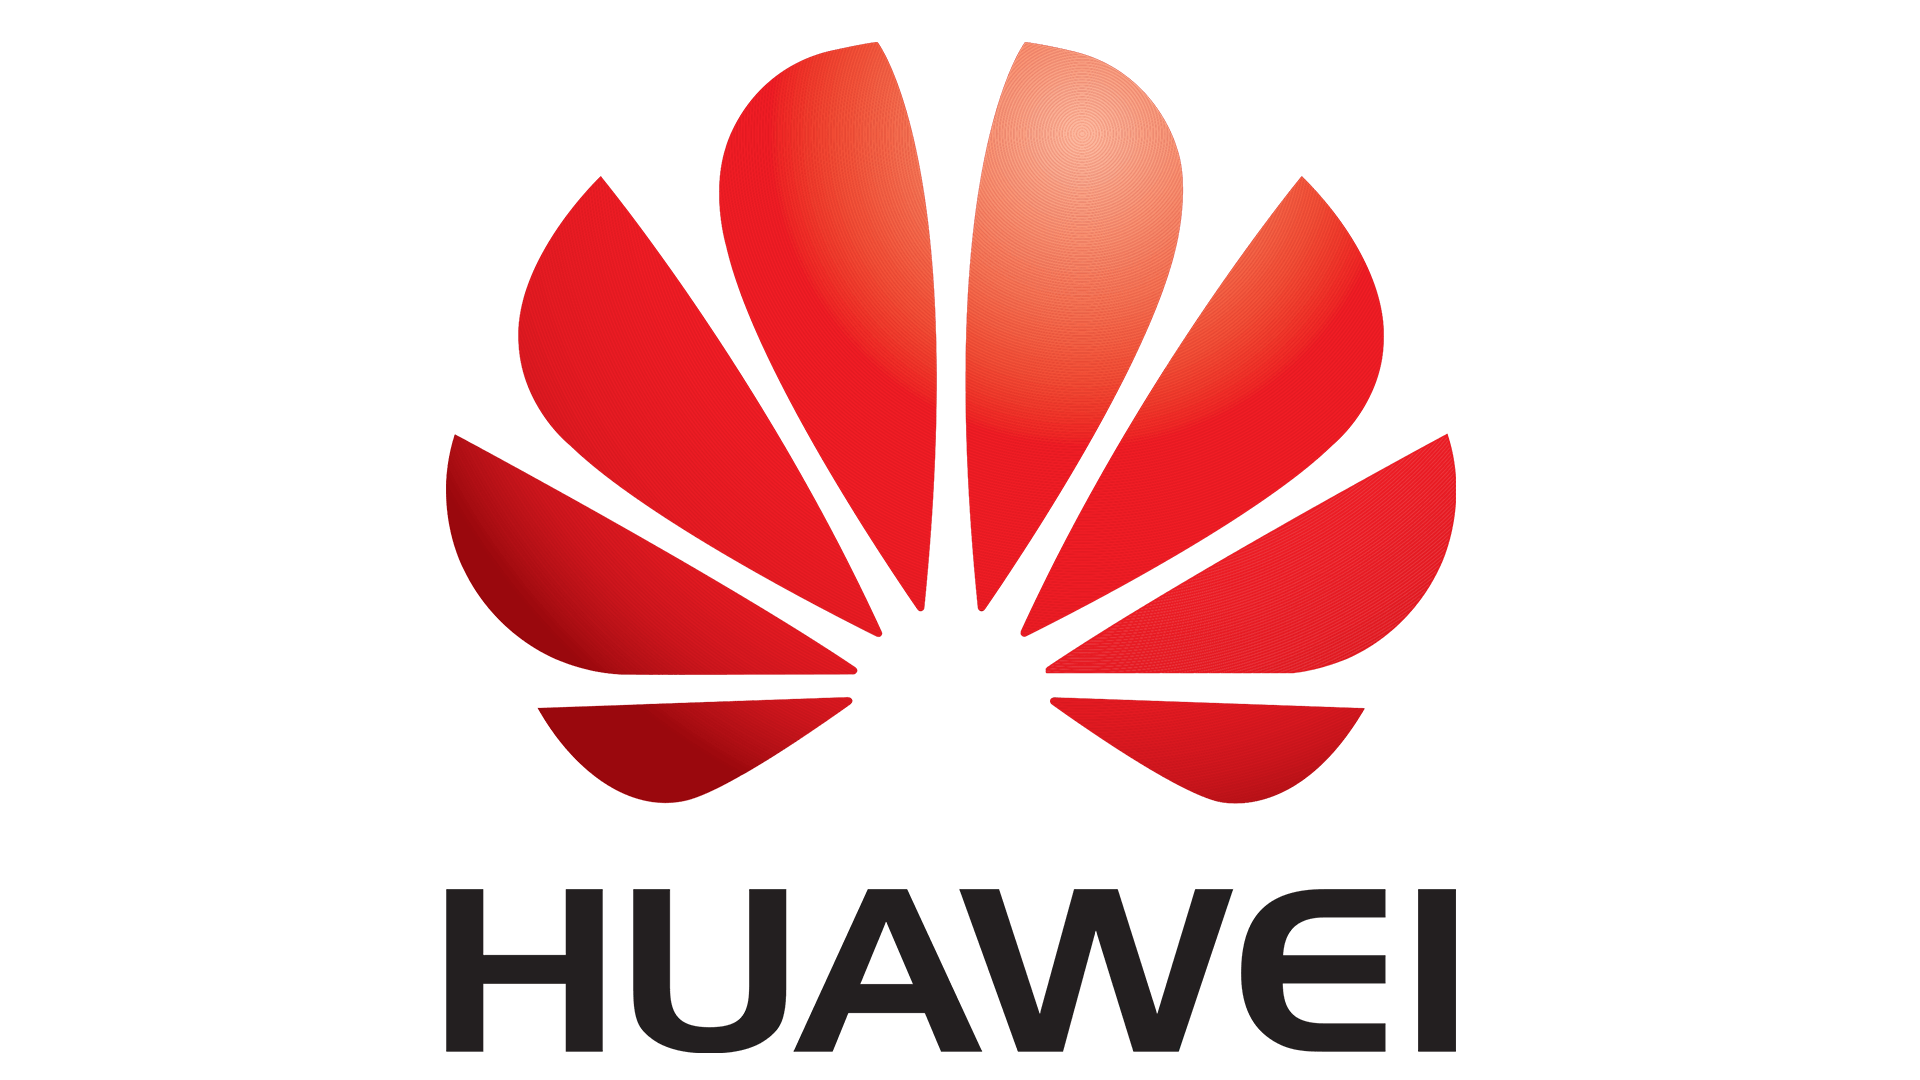 Chinese Phone Company Logo - Huawei logo, symbol, meaning, History and Evolution